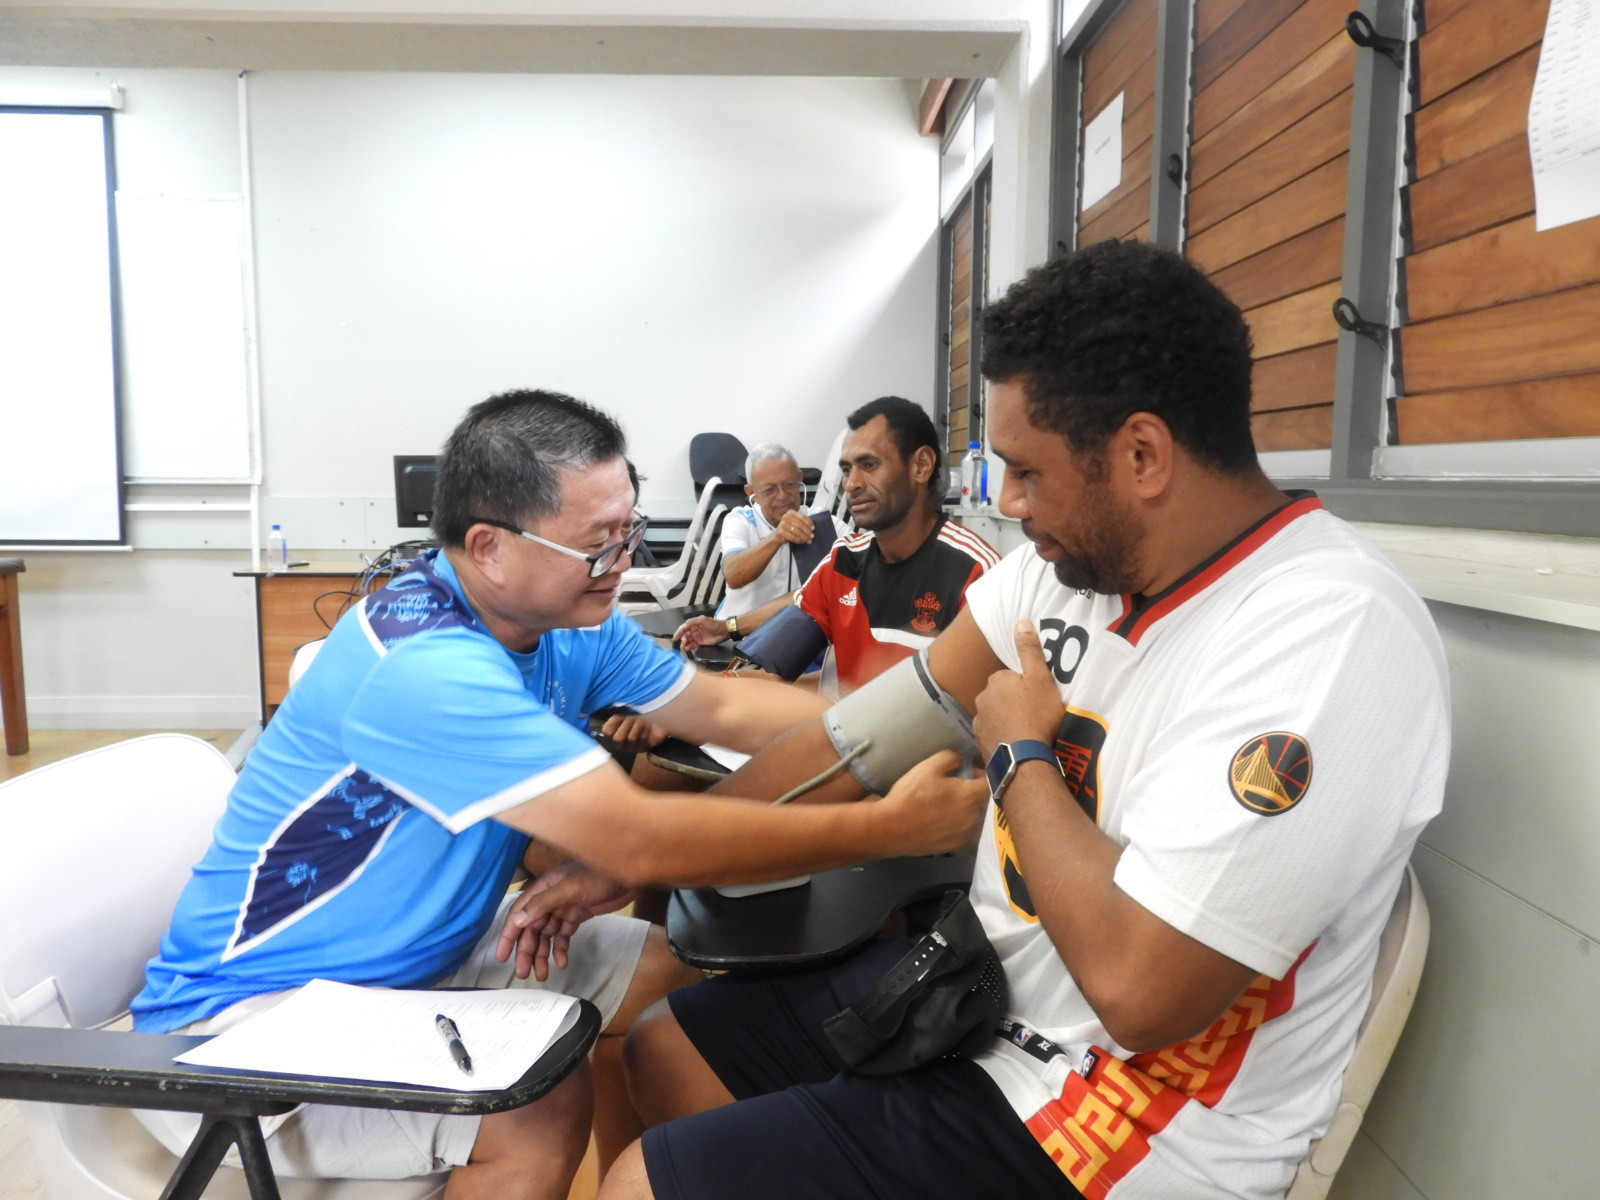 Fijian athletes and officials due to parcipate in next month's Samoa 2019 Pacific Games have undergone a final medical screening at the headquarters of their National Olympic Committee, FASANOC ©fasanoc.org